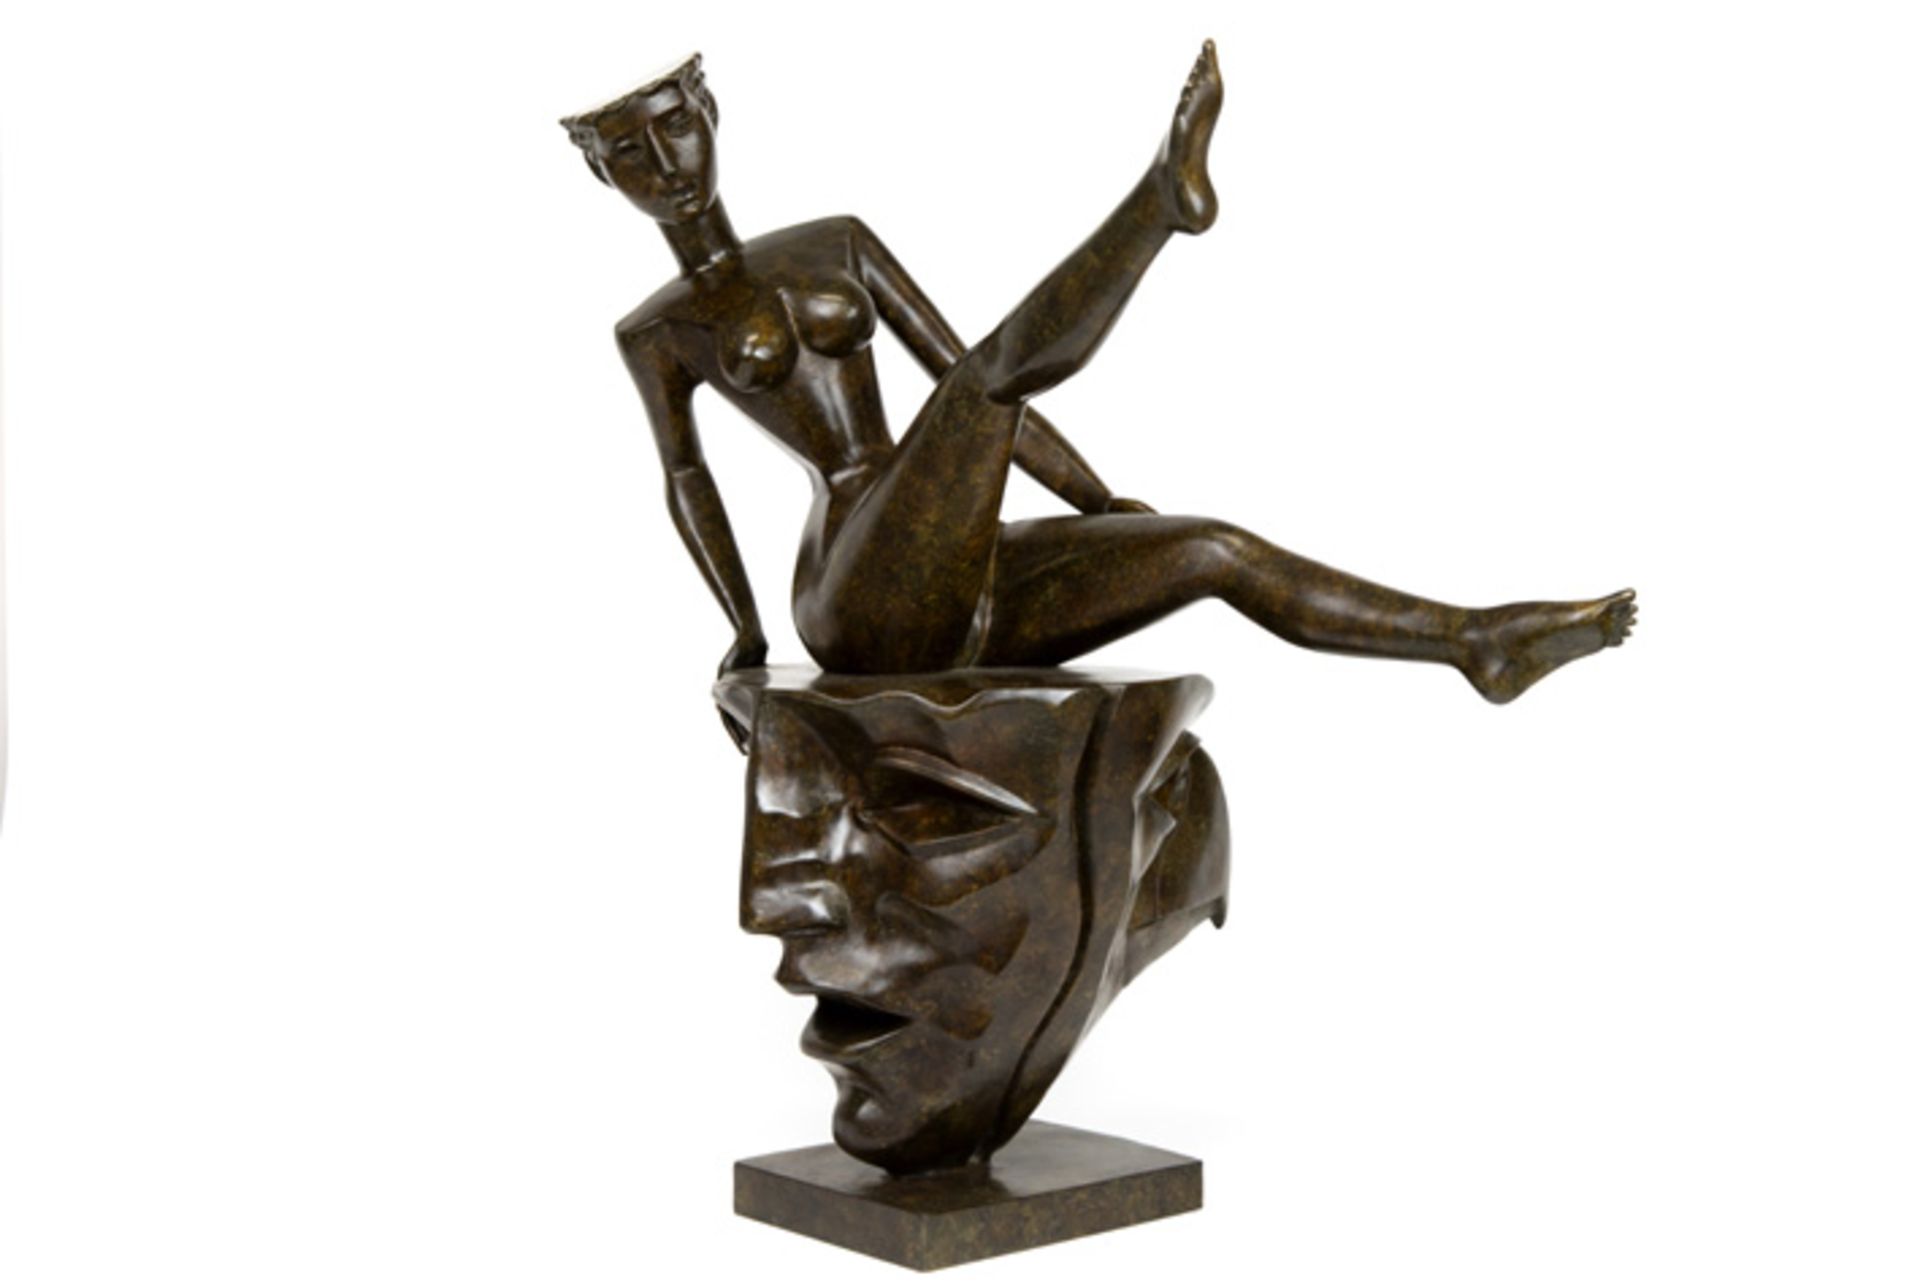 21st Cent. "Lady on the top" sculpture in bronze - signed Igor Tcholaria and with foundry mark - Image 2 of 5